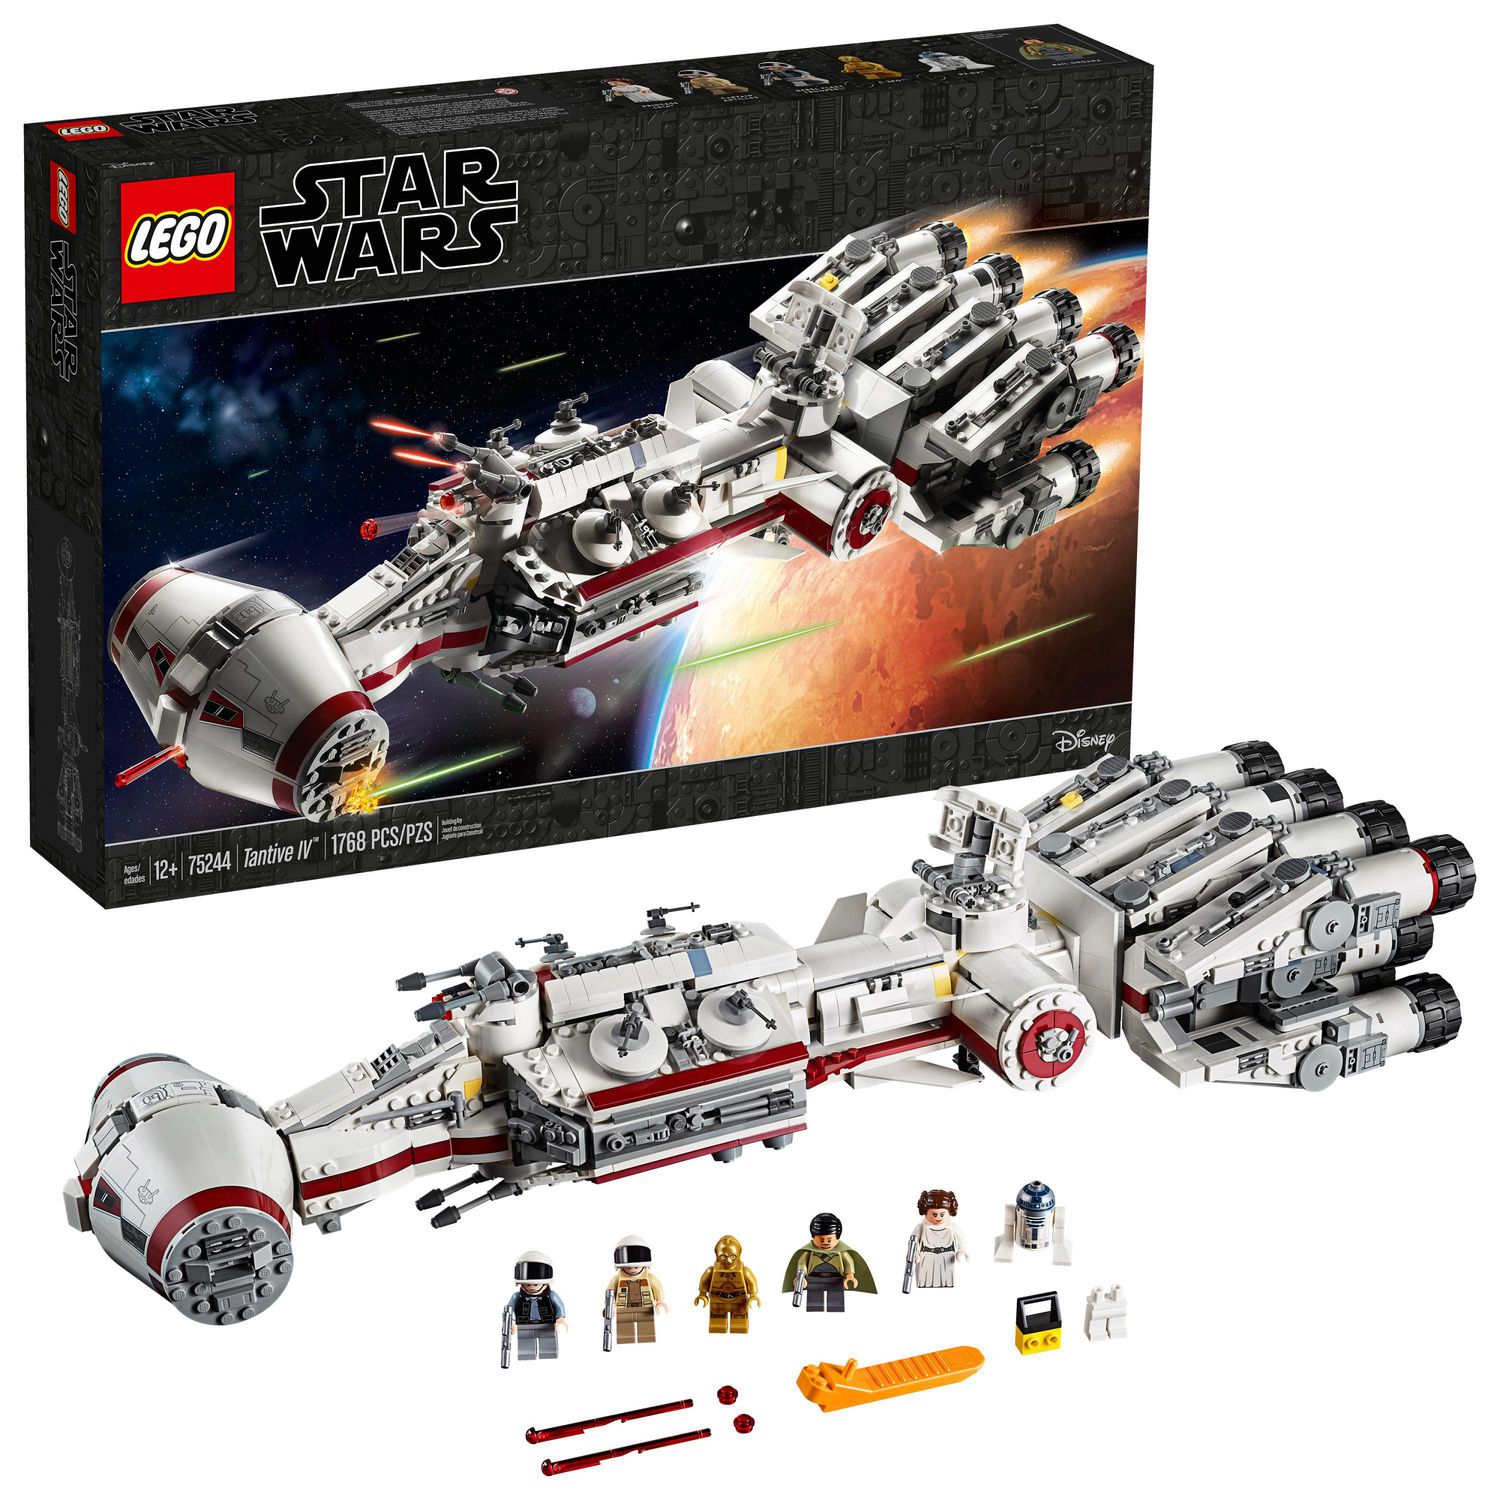 LEGO Star Wars: A New Hope 75244 Tantive IV Toy Building Kit (1768